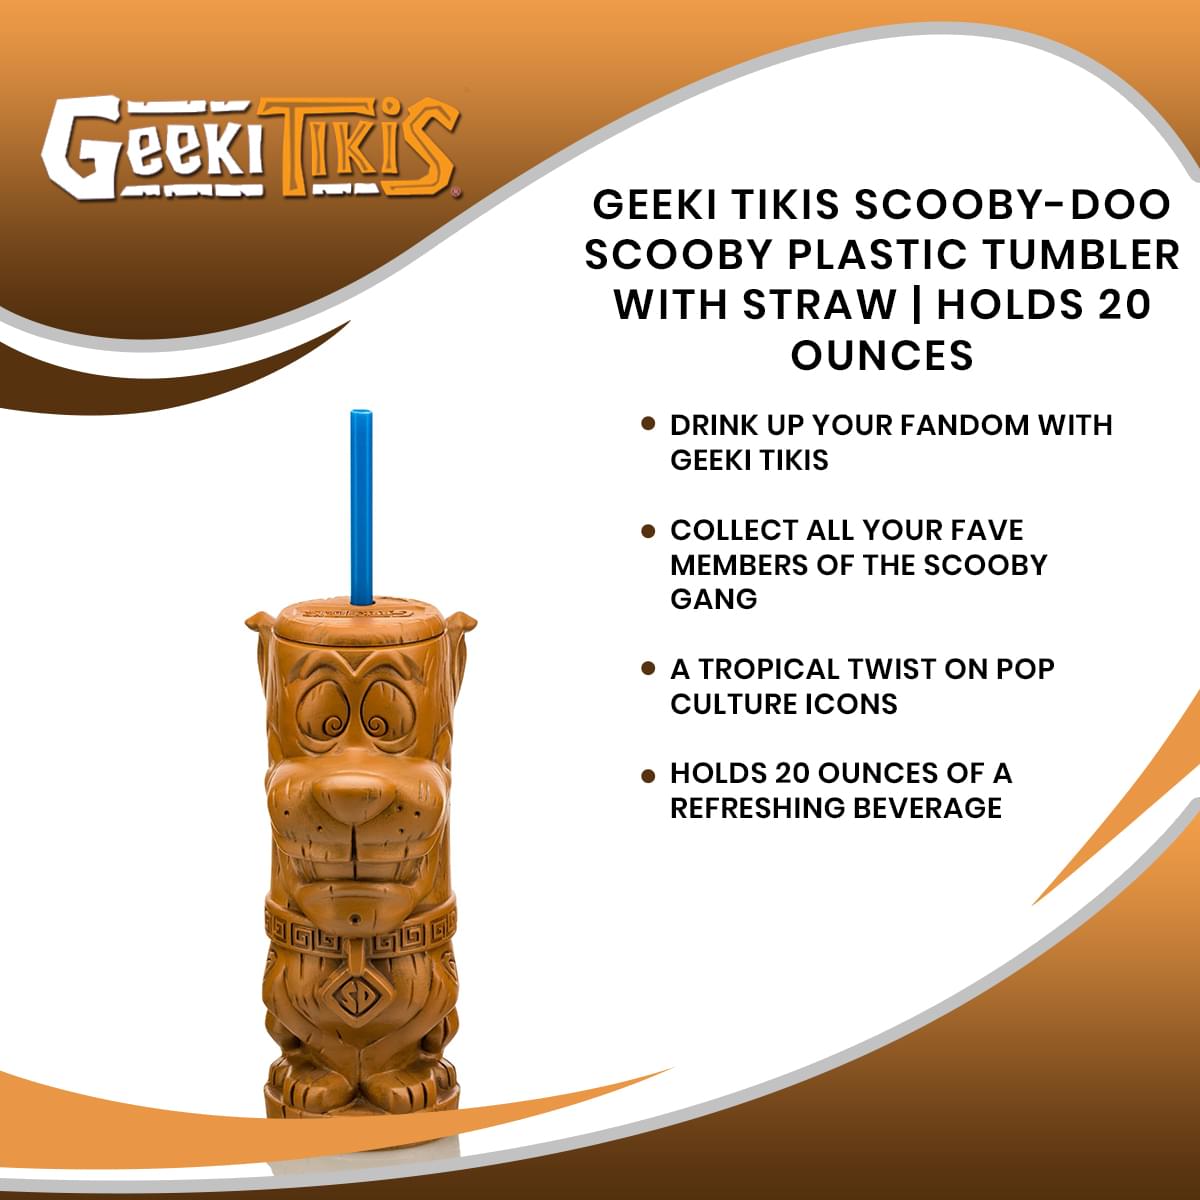 Geeki Tikis Scooby-Doo Scooby Plastic Tumbler with Straw | Holds 20 Ounces